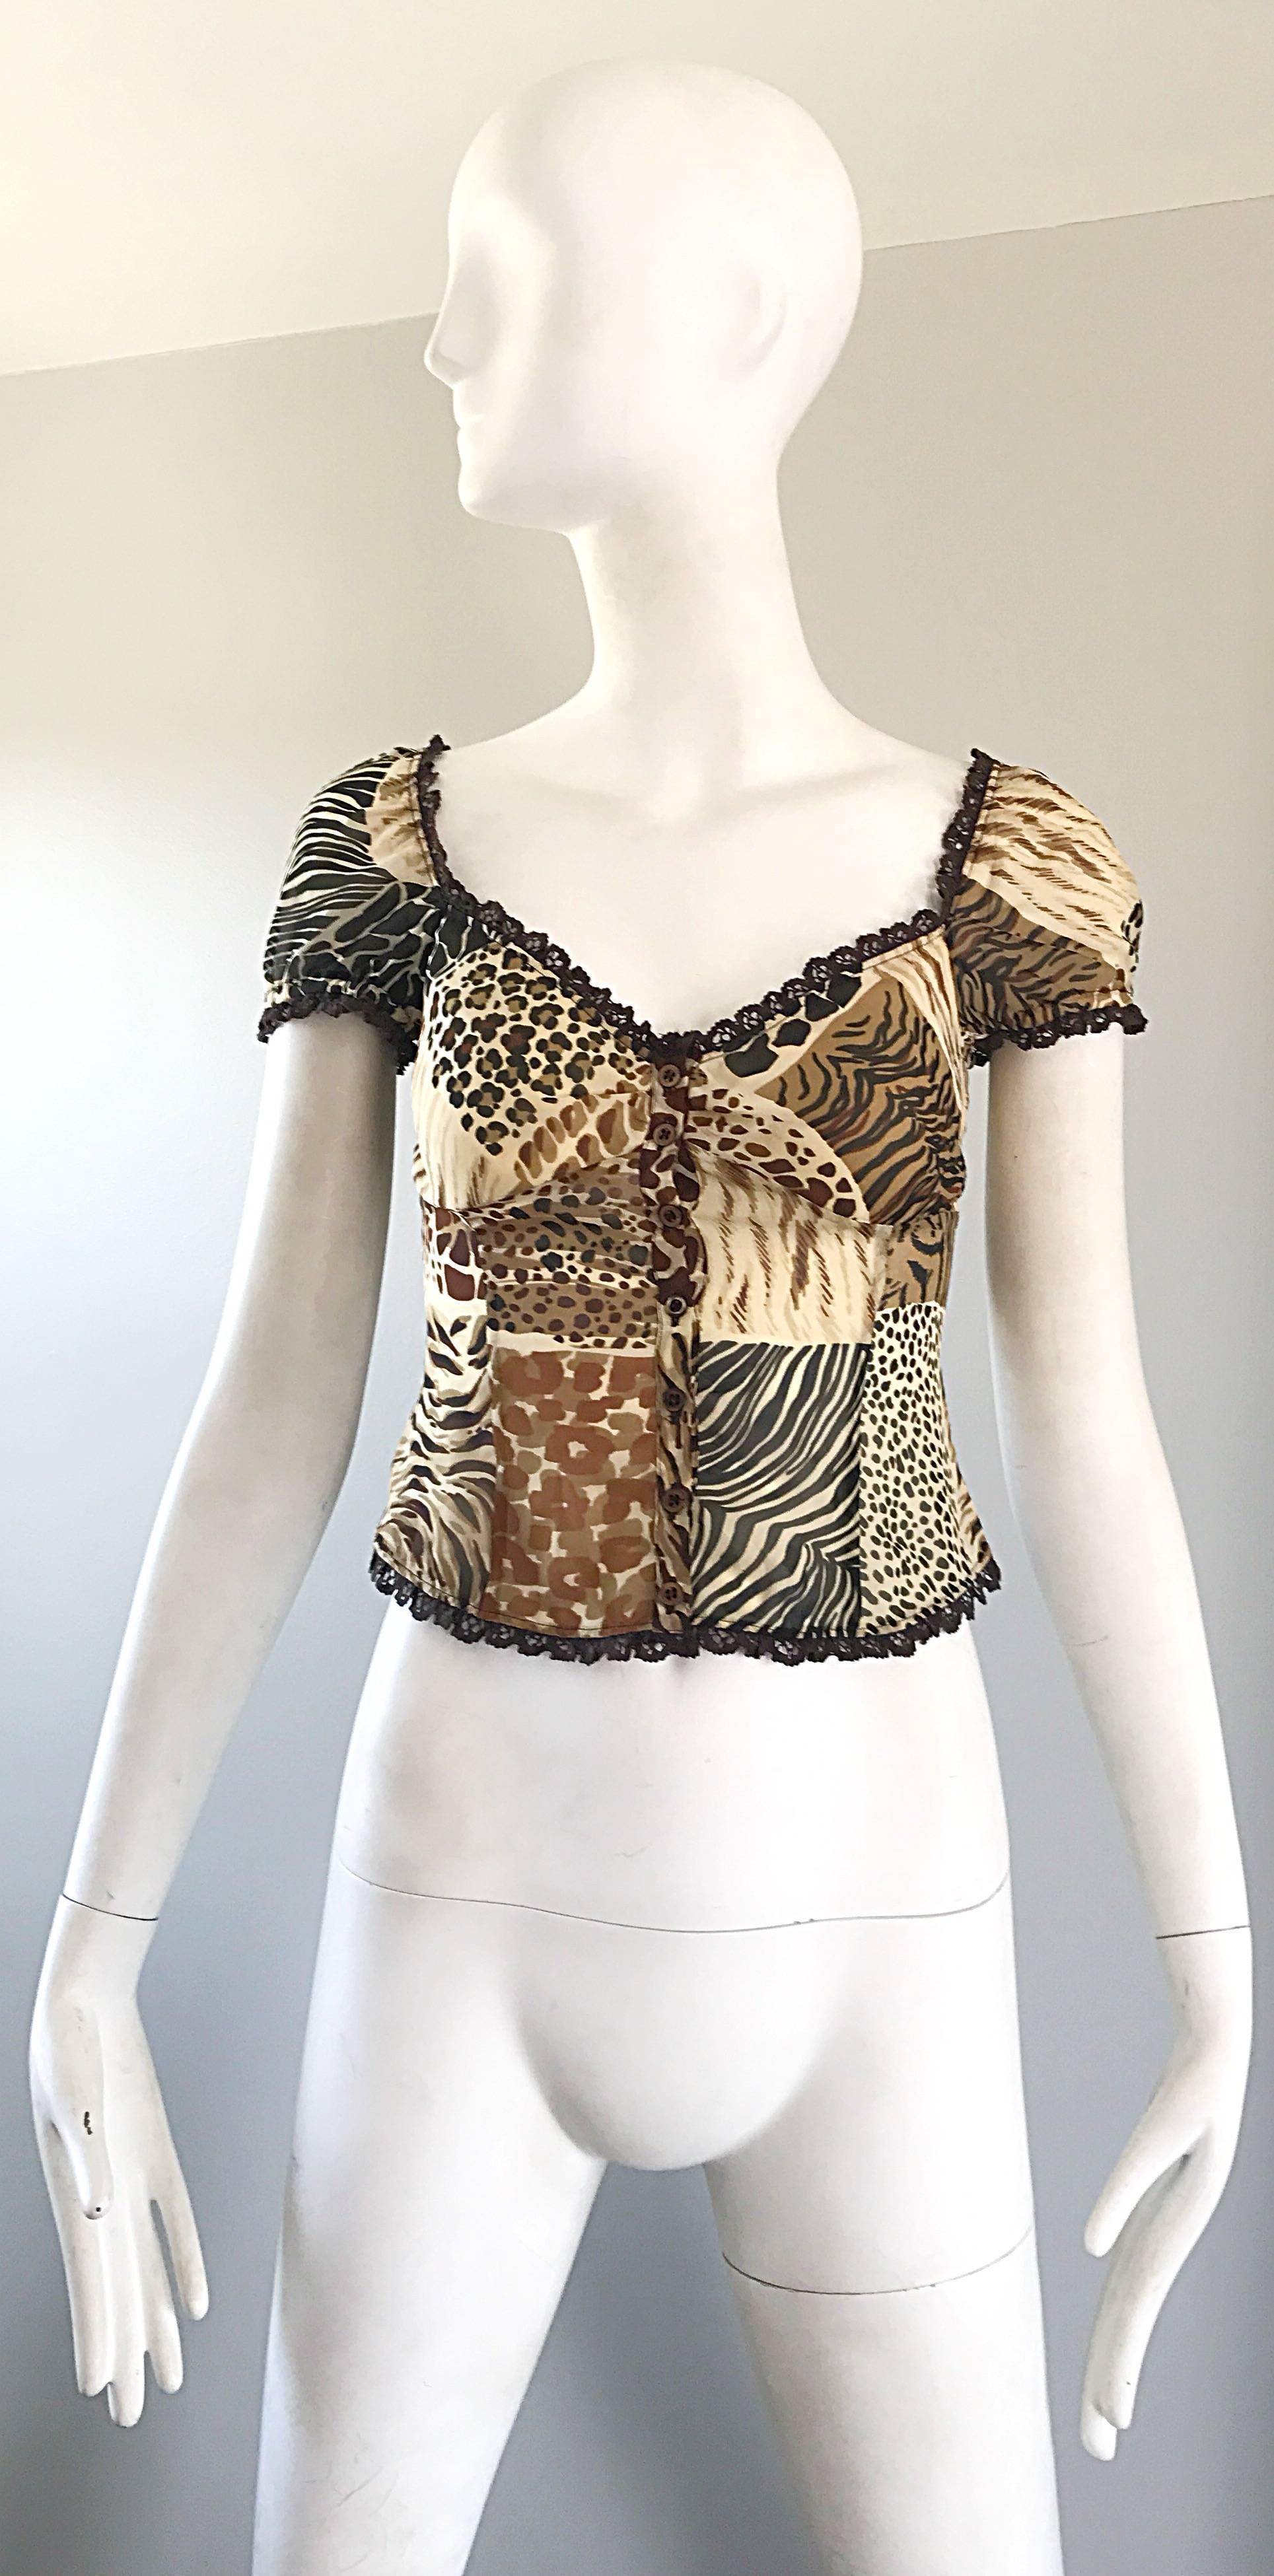 Beautiful vintage MOSCHINO Cheap & Chic silk animal print blouse! Features leopard, zebra, cheetah, and tiger prints throughout. Warm colors of brown, ivory, trimmed with black lace. Bust is lined with silk chiffon. Buttons up the front. Can easily